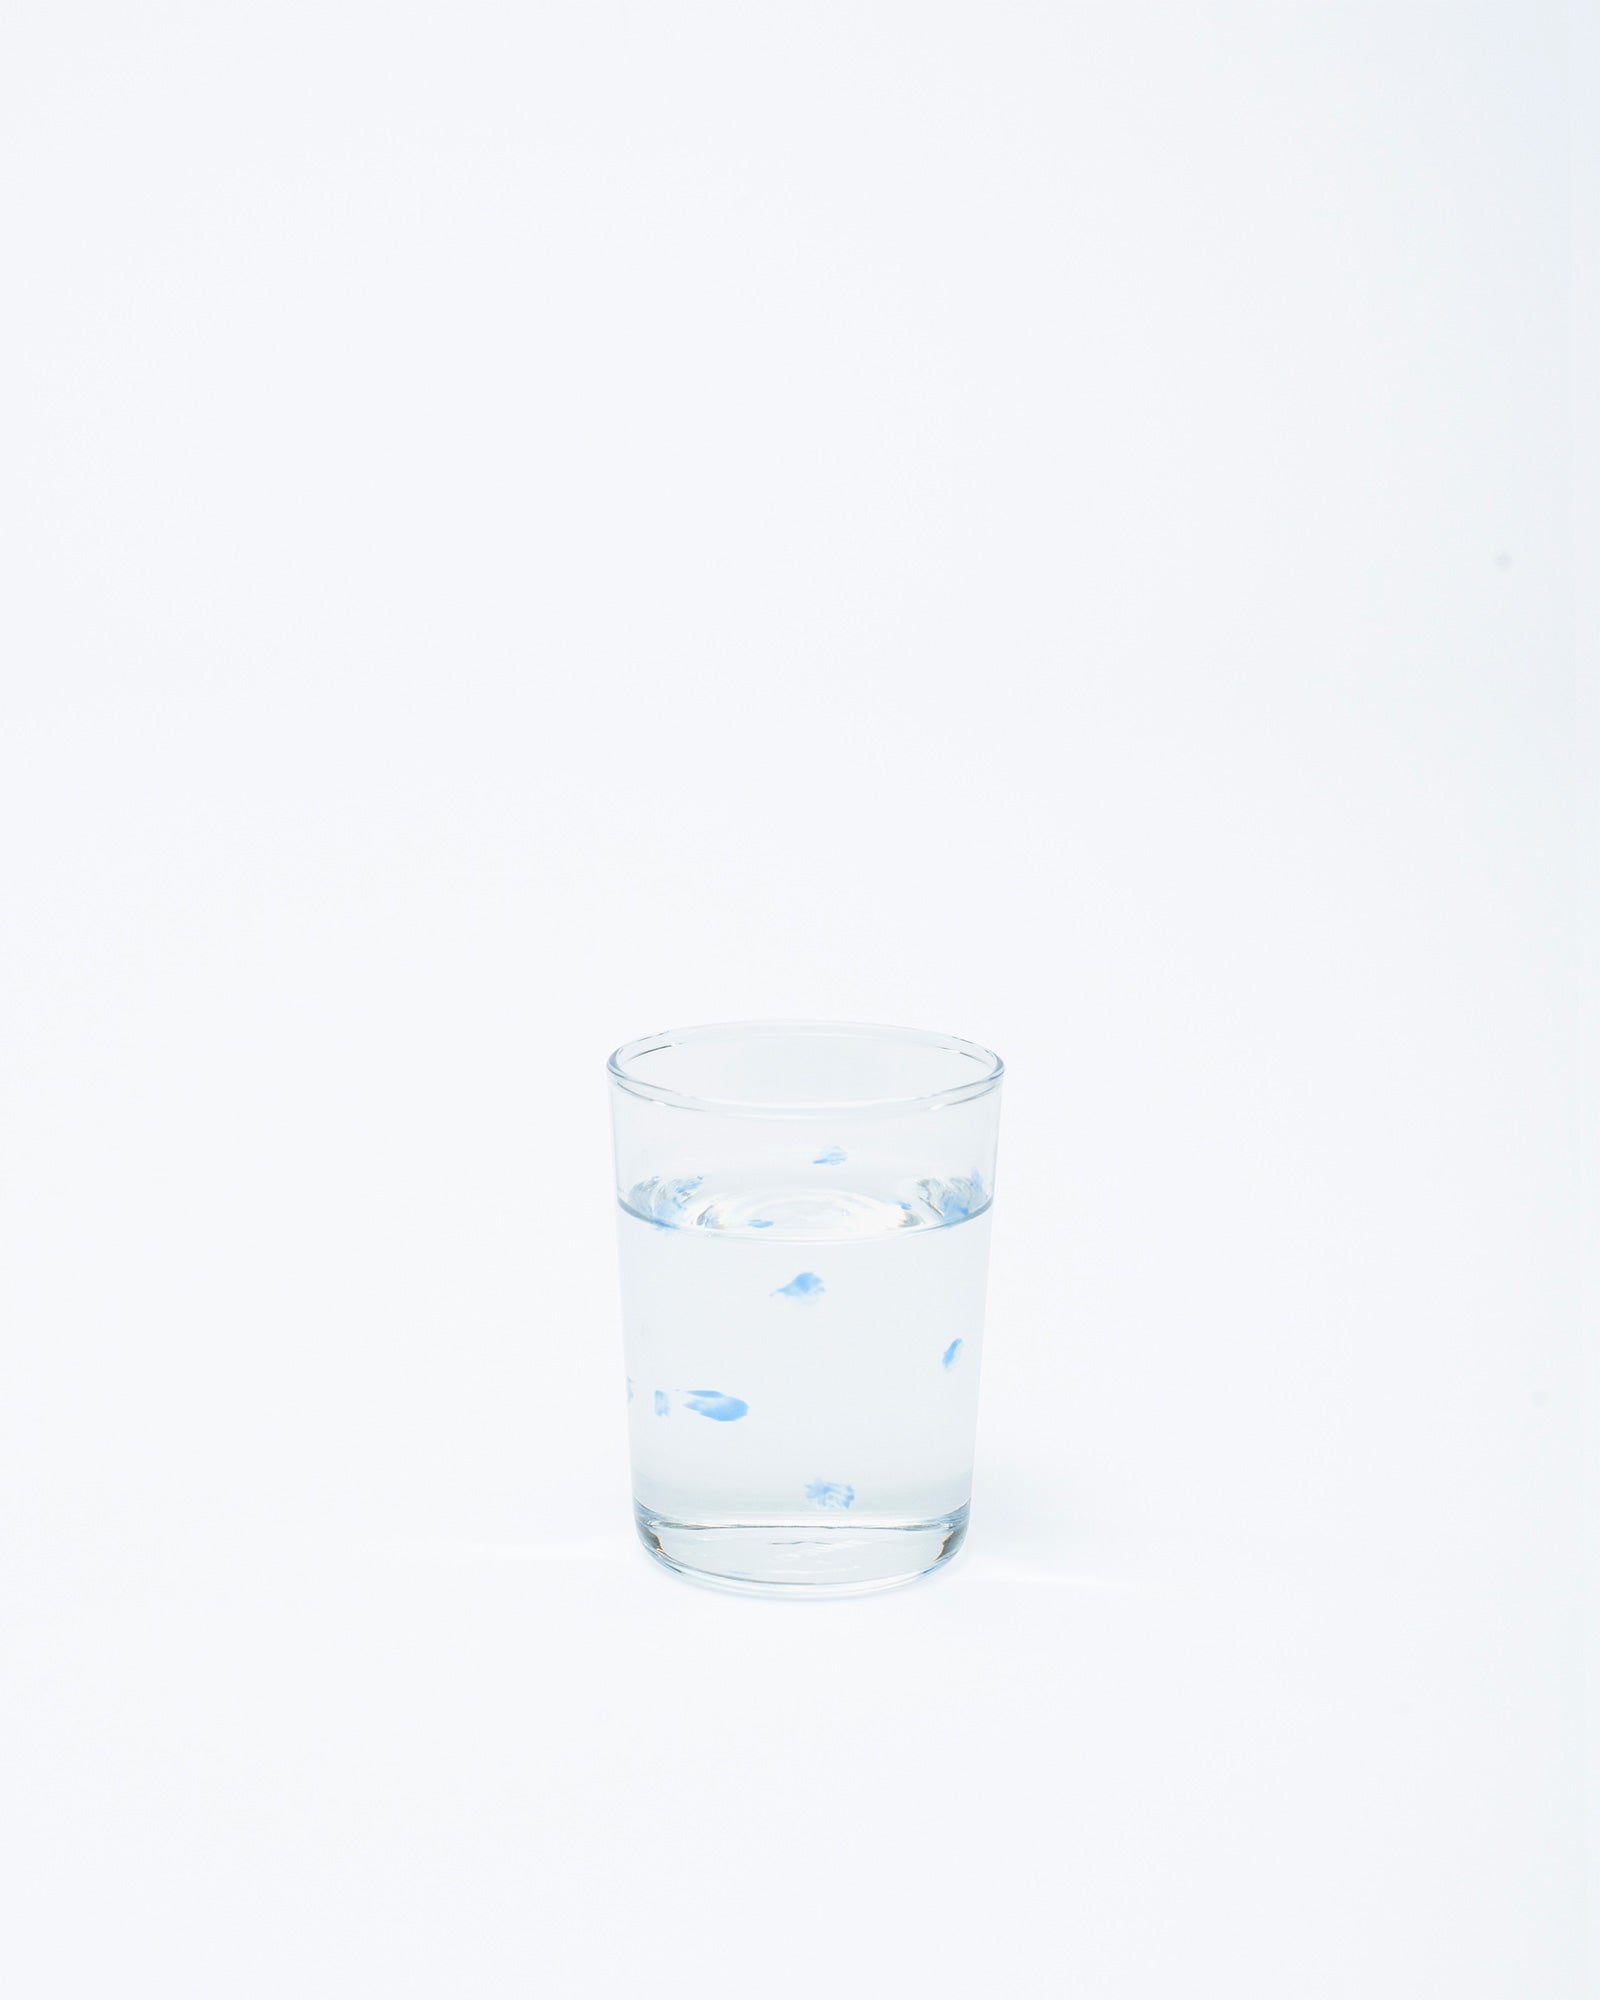 A glass with handmade dotted design in water on a white background.